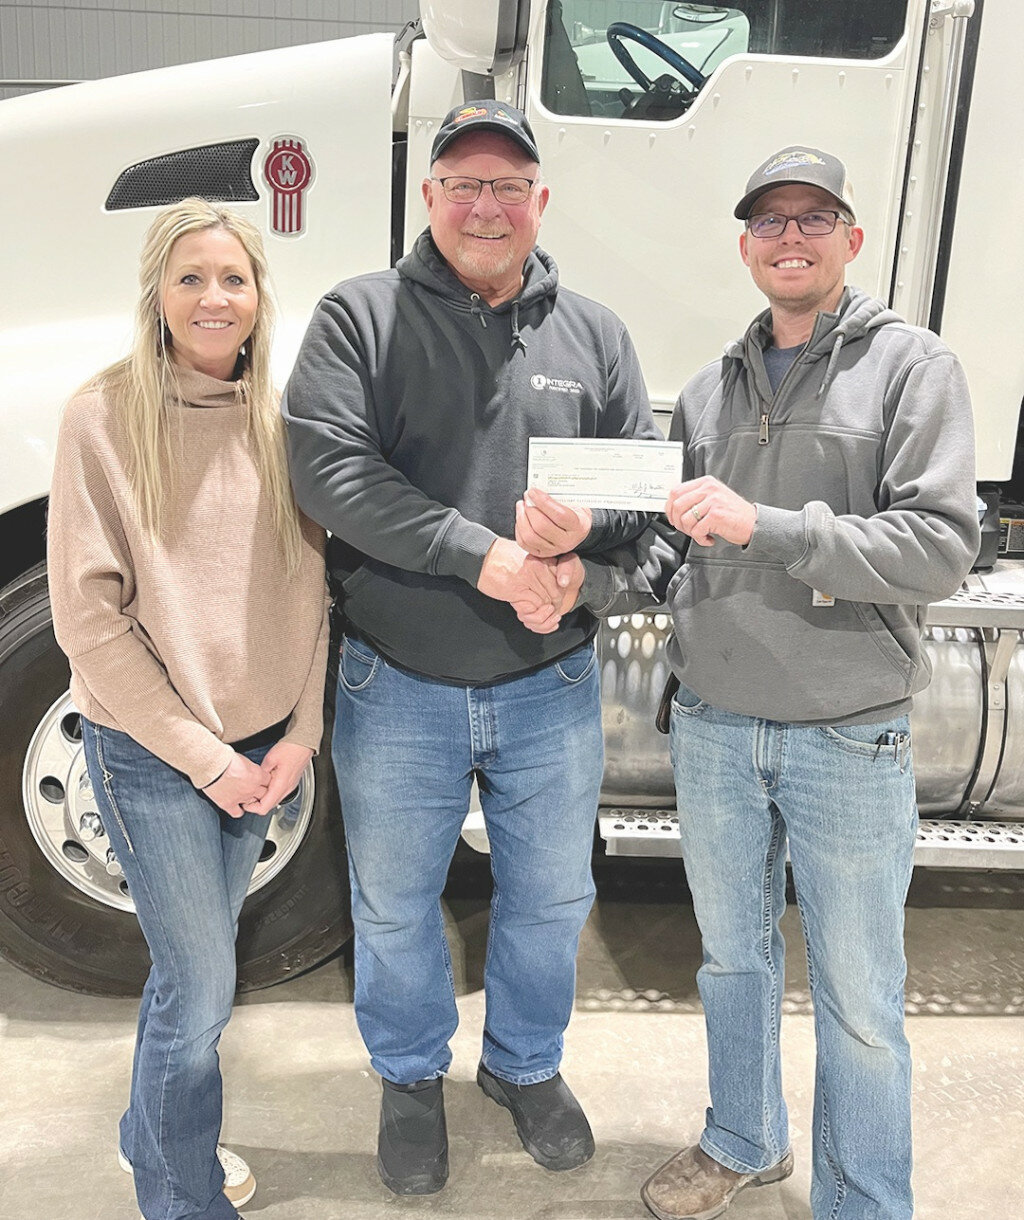 Pictured above are members of Liberty’s Troops Leanne  and Cody Amdahl being presented a check for $2500 by Mike Blum, center, for their organization.